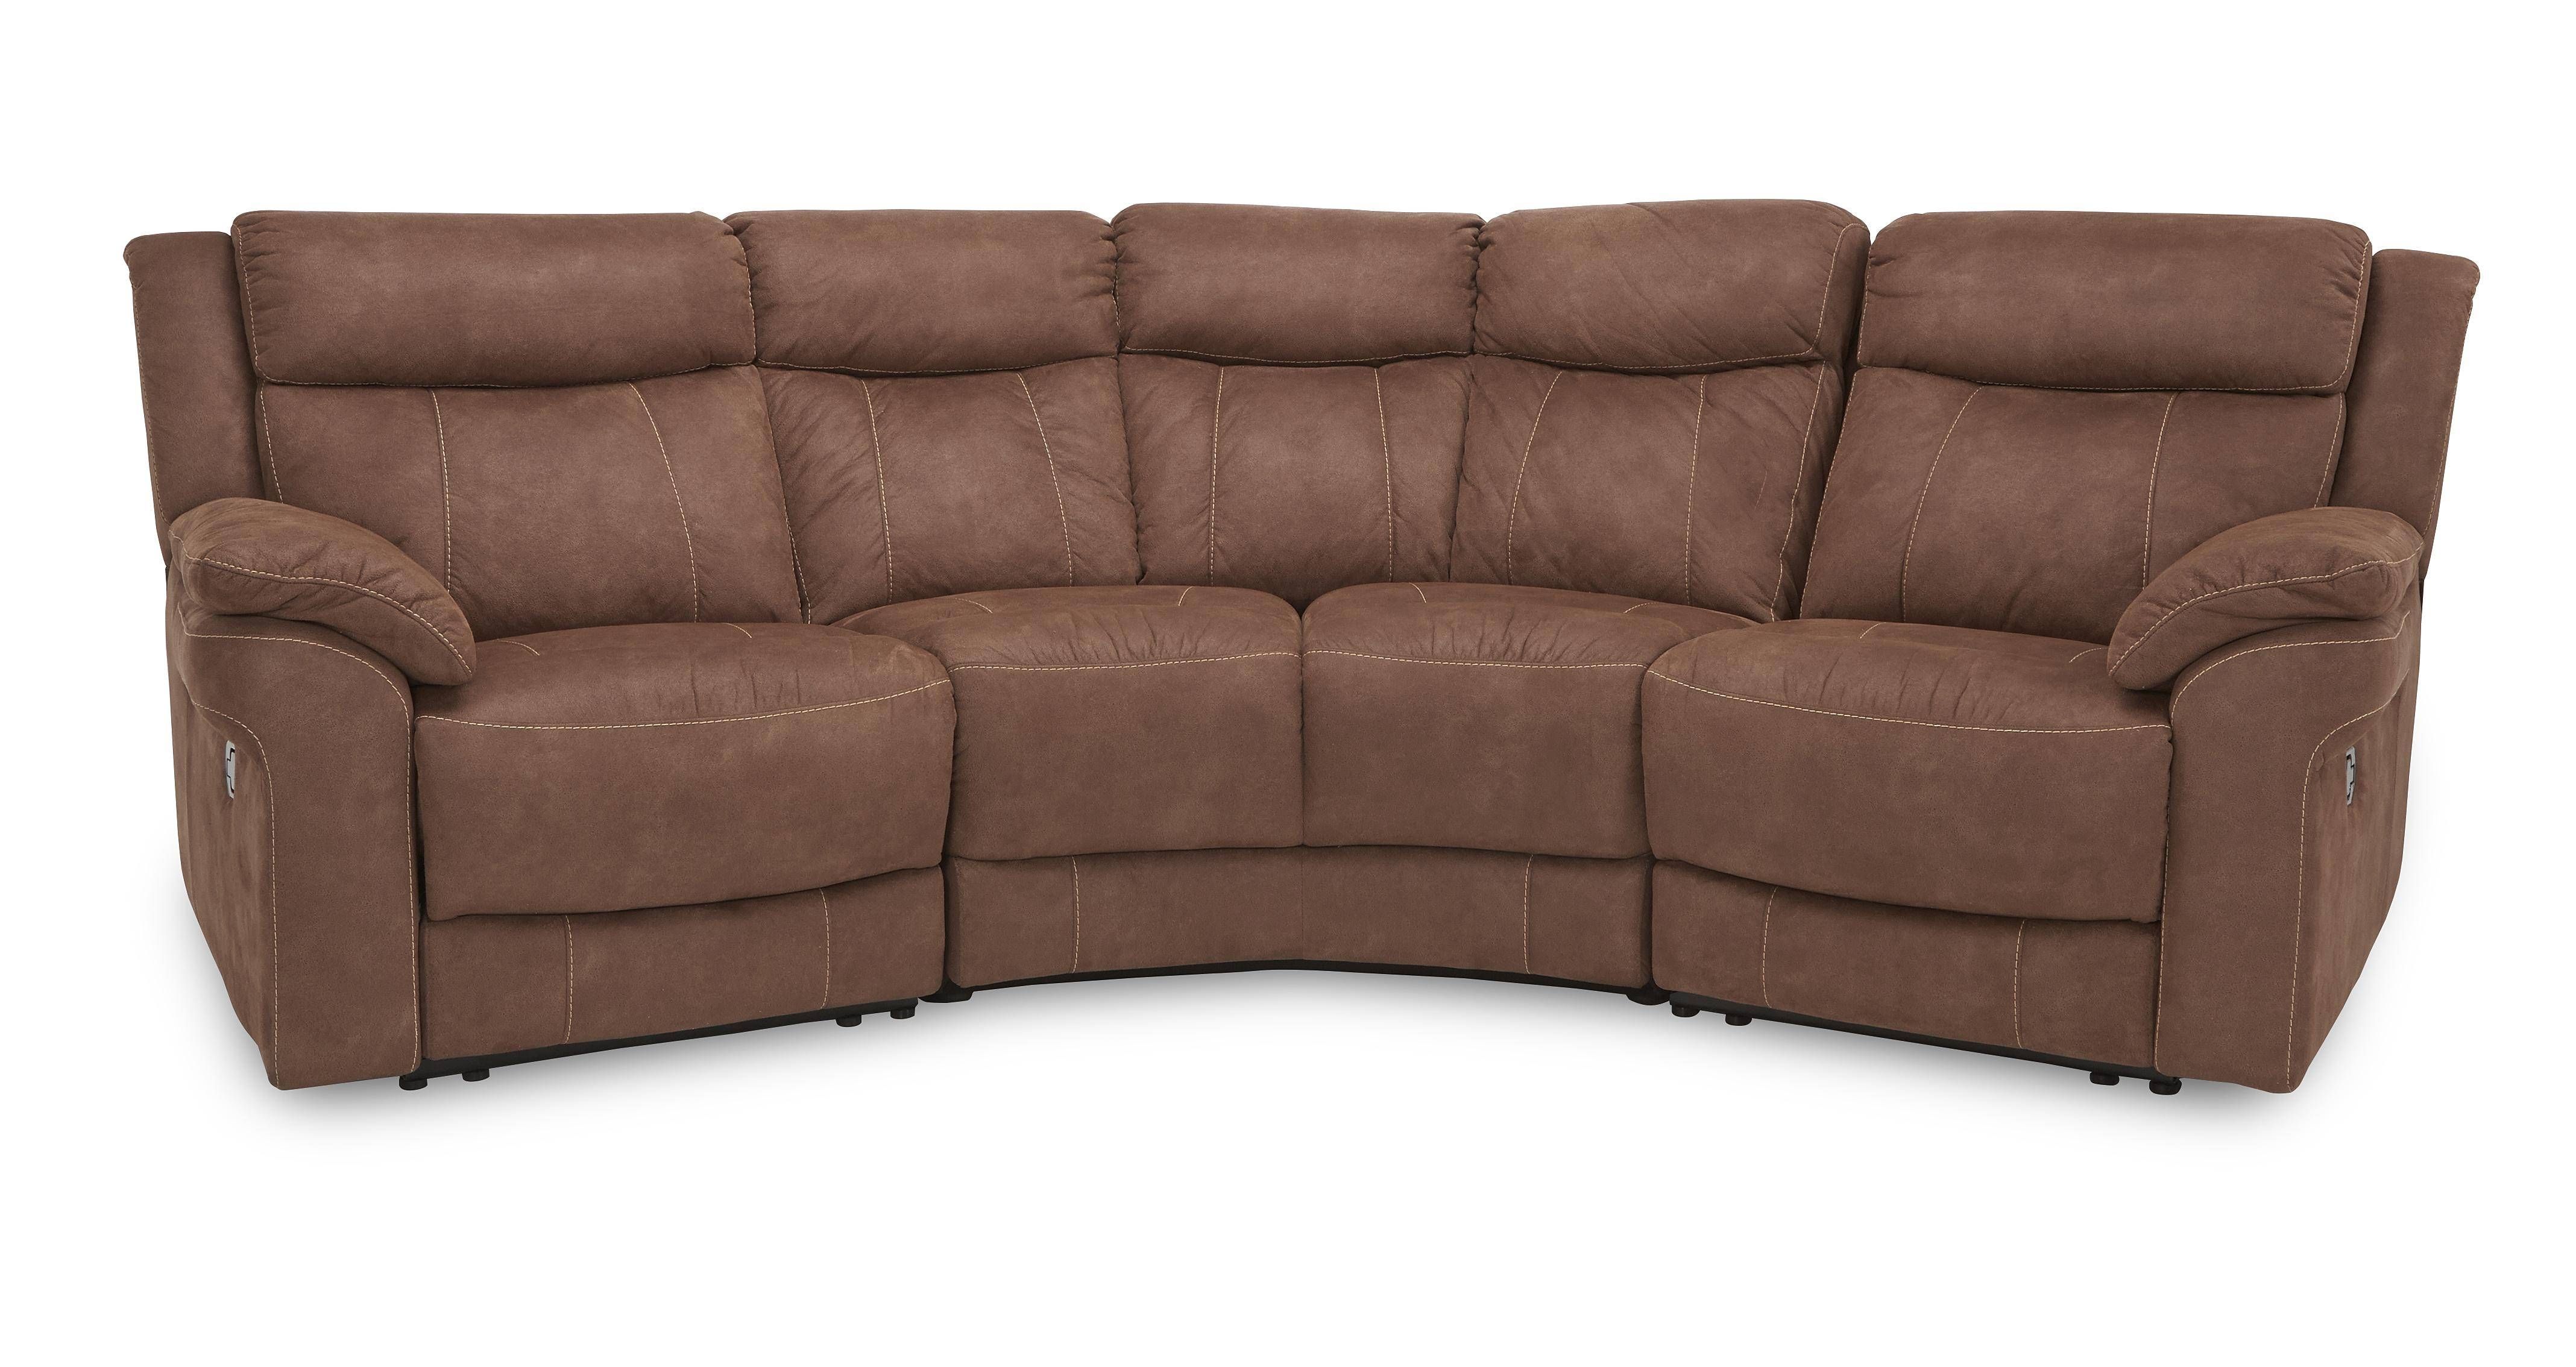 Decoration Seater Sofa With Court Seater Curved Sofa Arizona With Curved Recliner Sofa (View 17 of 30)